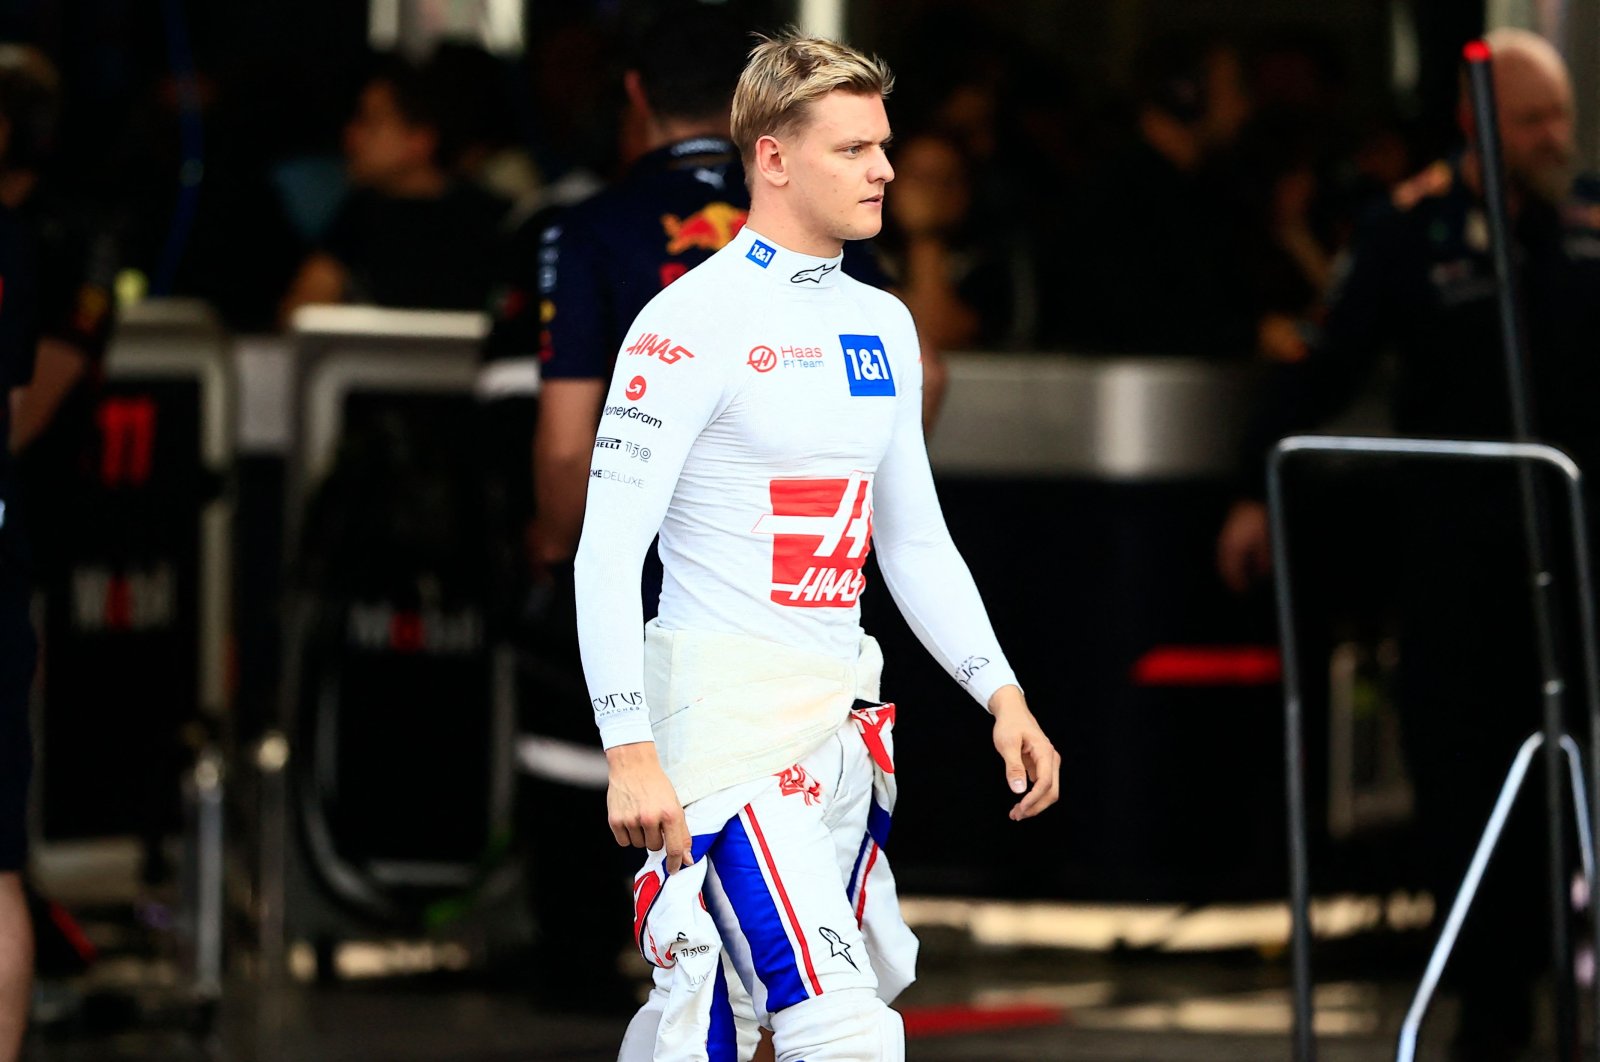 Haas F1 Team&#039;s German driver Mick Schumacher walks in the pit lane during the qualifying session for the Formula One Mexico Grand Prix, at the Hermanos Rodriguez racetrack, Mexico City, Oct. 29, 2022. (AFP Photo)